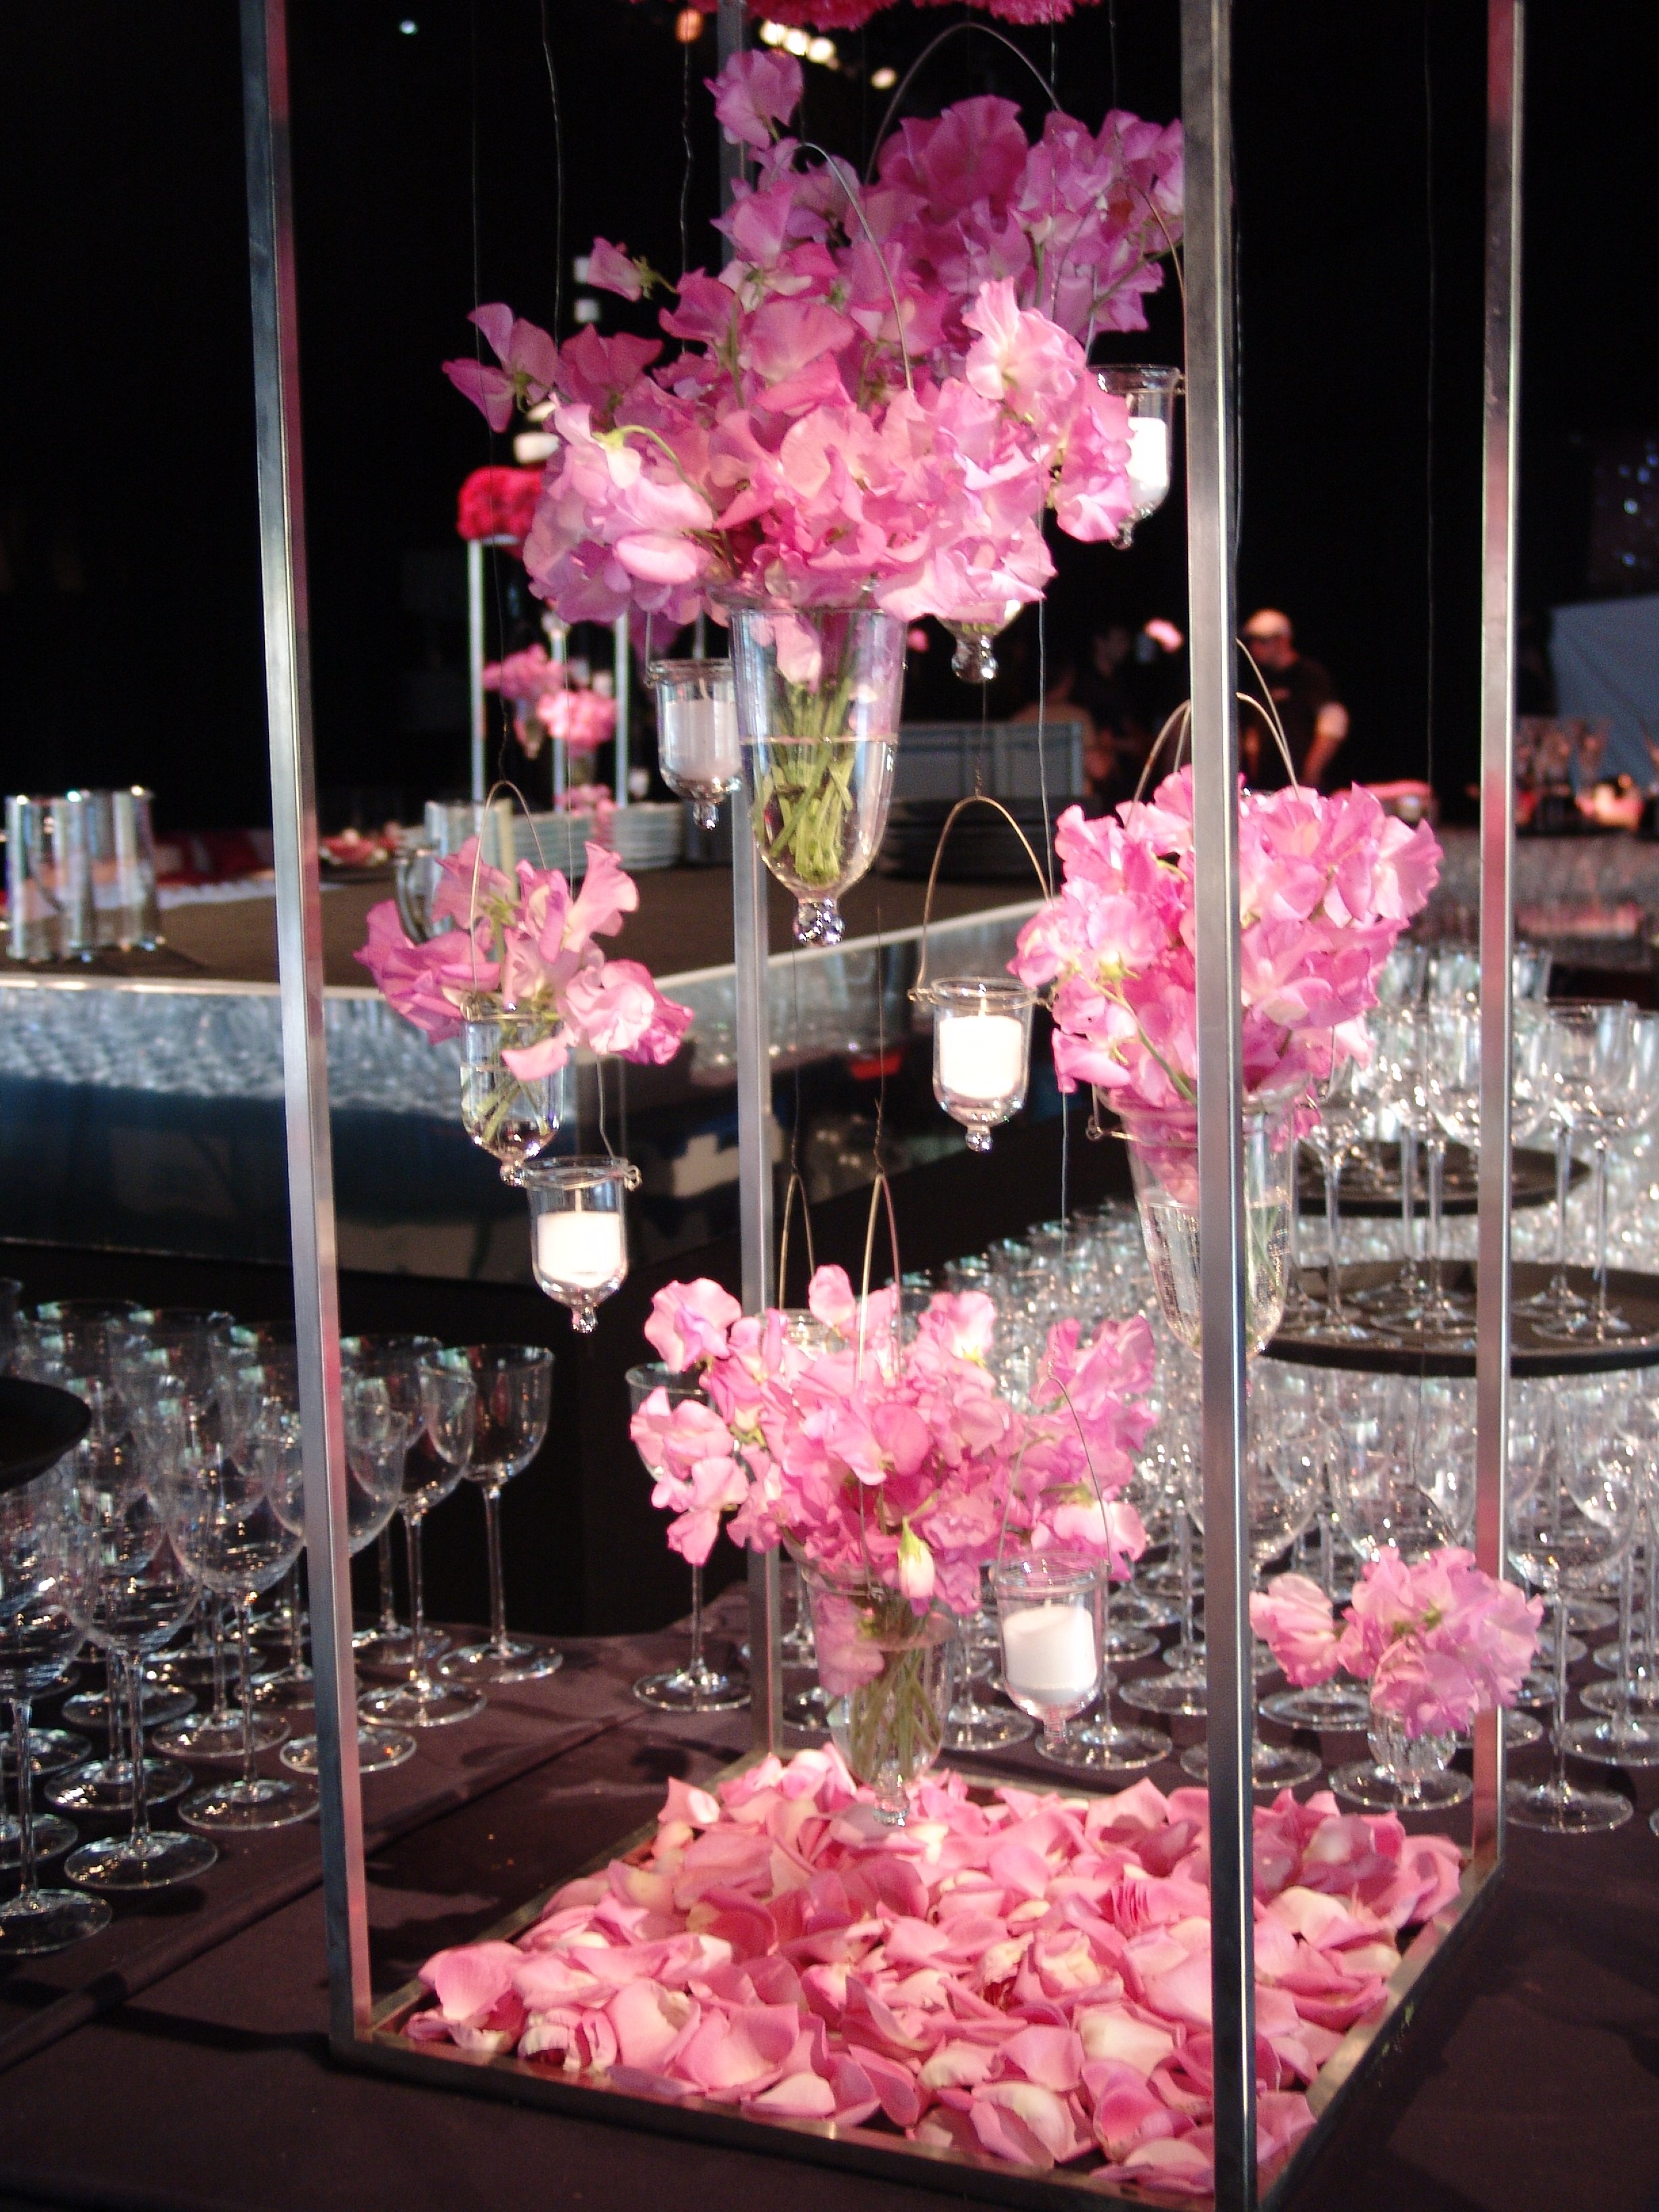 flower decorations private party.JPG